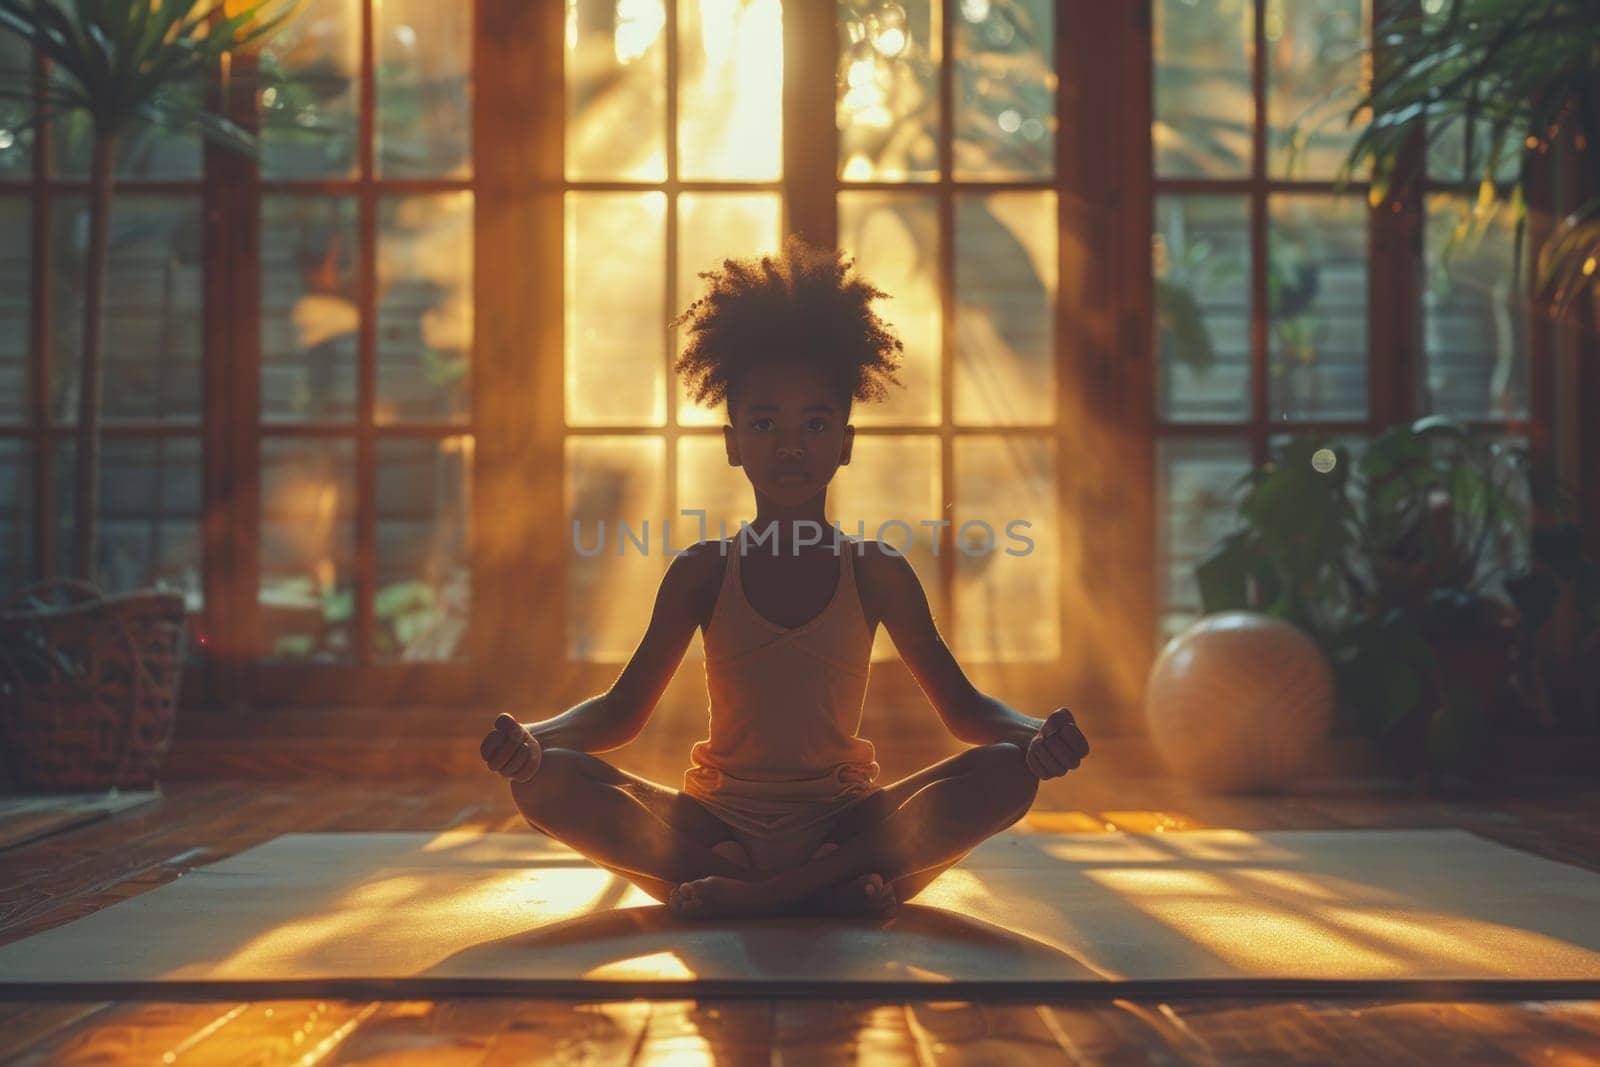 Woman Practicing Yoga by Window by but_photo